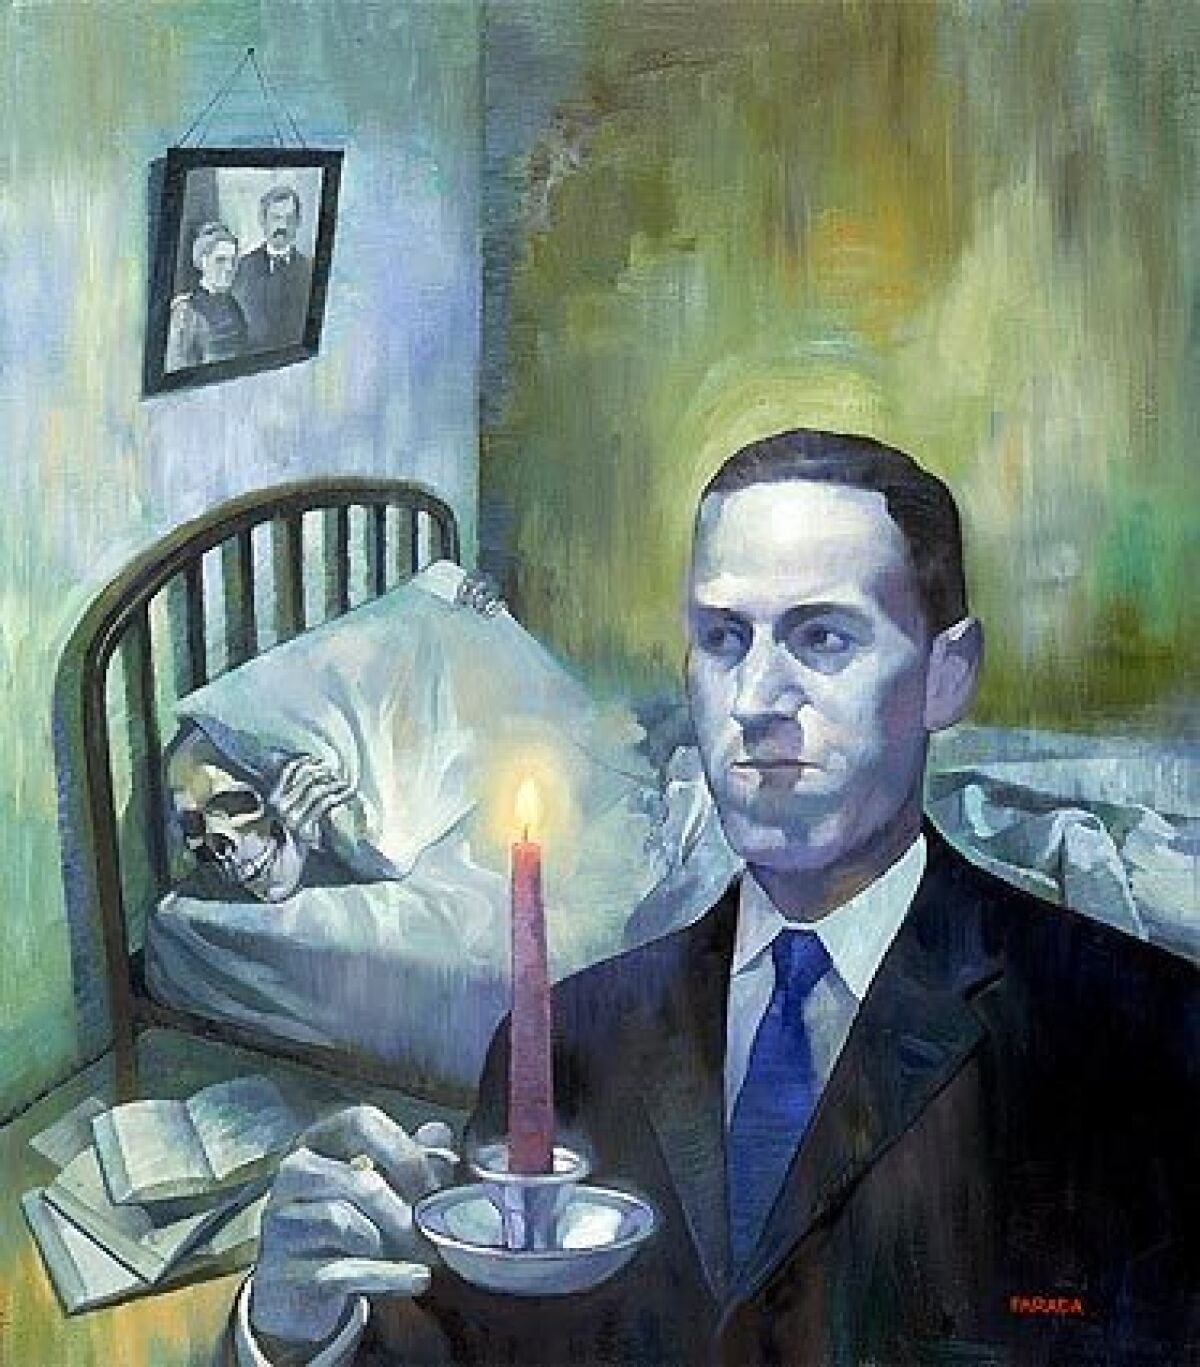 An illustration of the writer H.P. Lovecraft. 83 years after his death, his racist ideas are drawing scrutiny